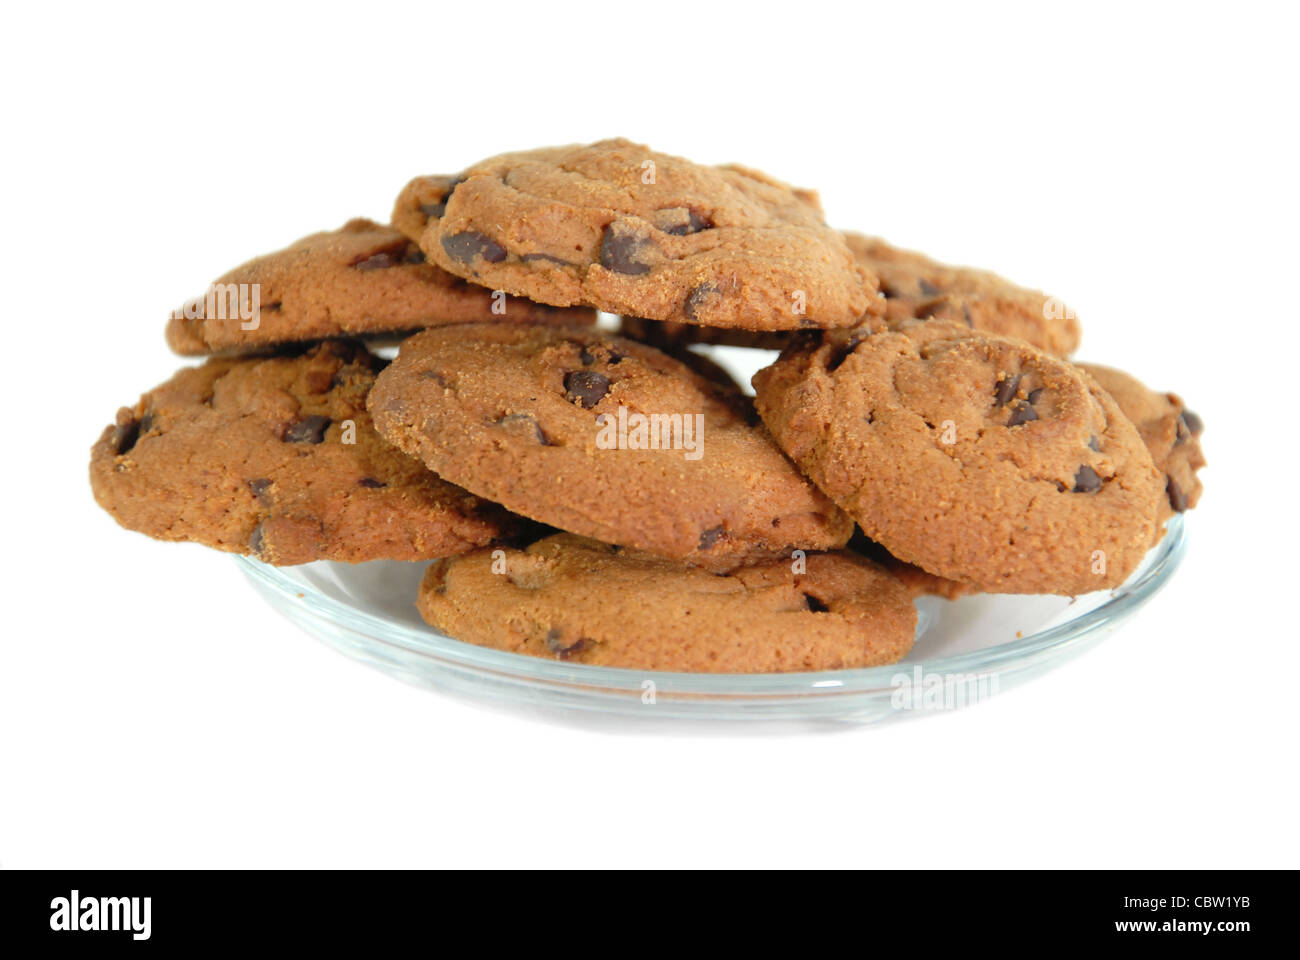 biscuits flavored with a delicious hearty homemade chocolate chunks Stock Photo